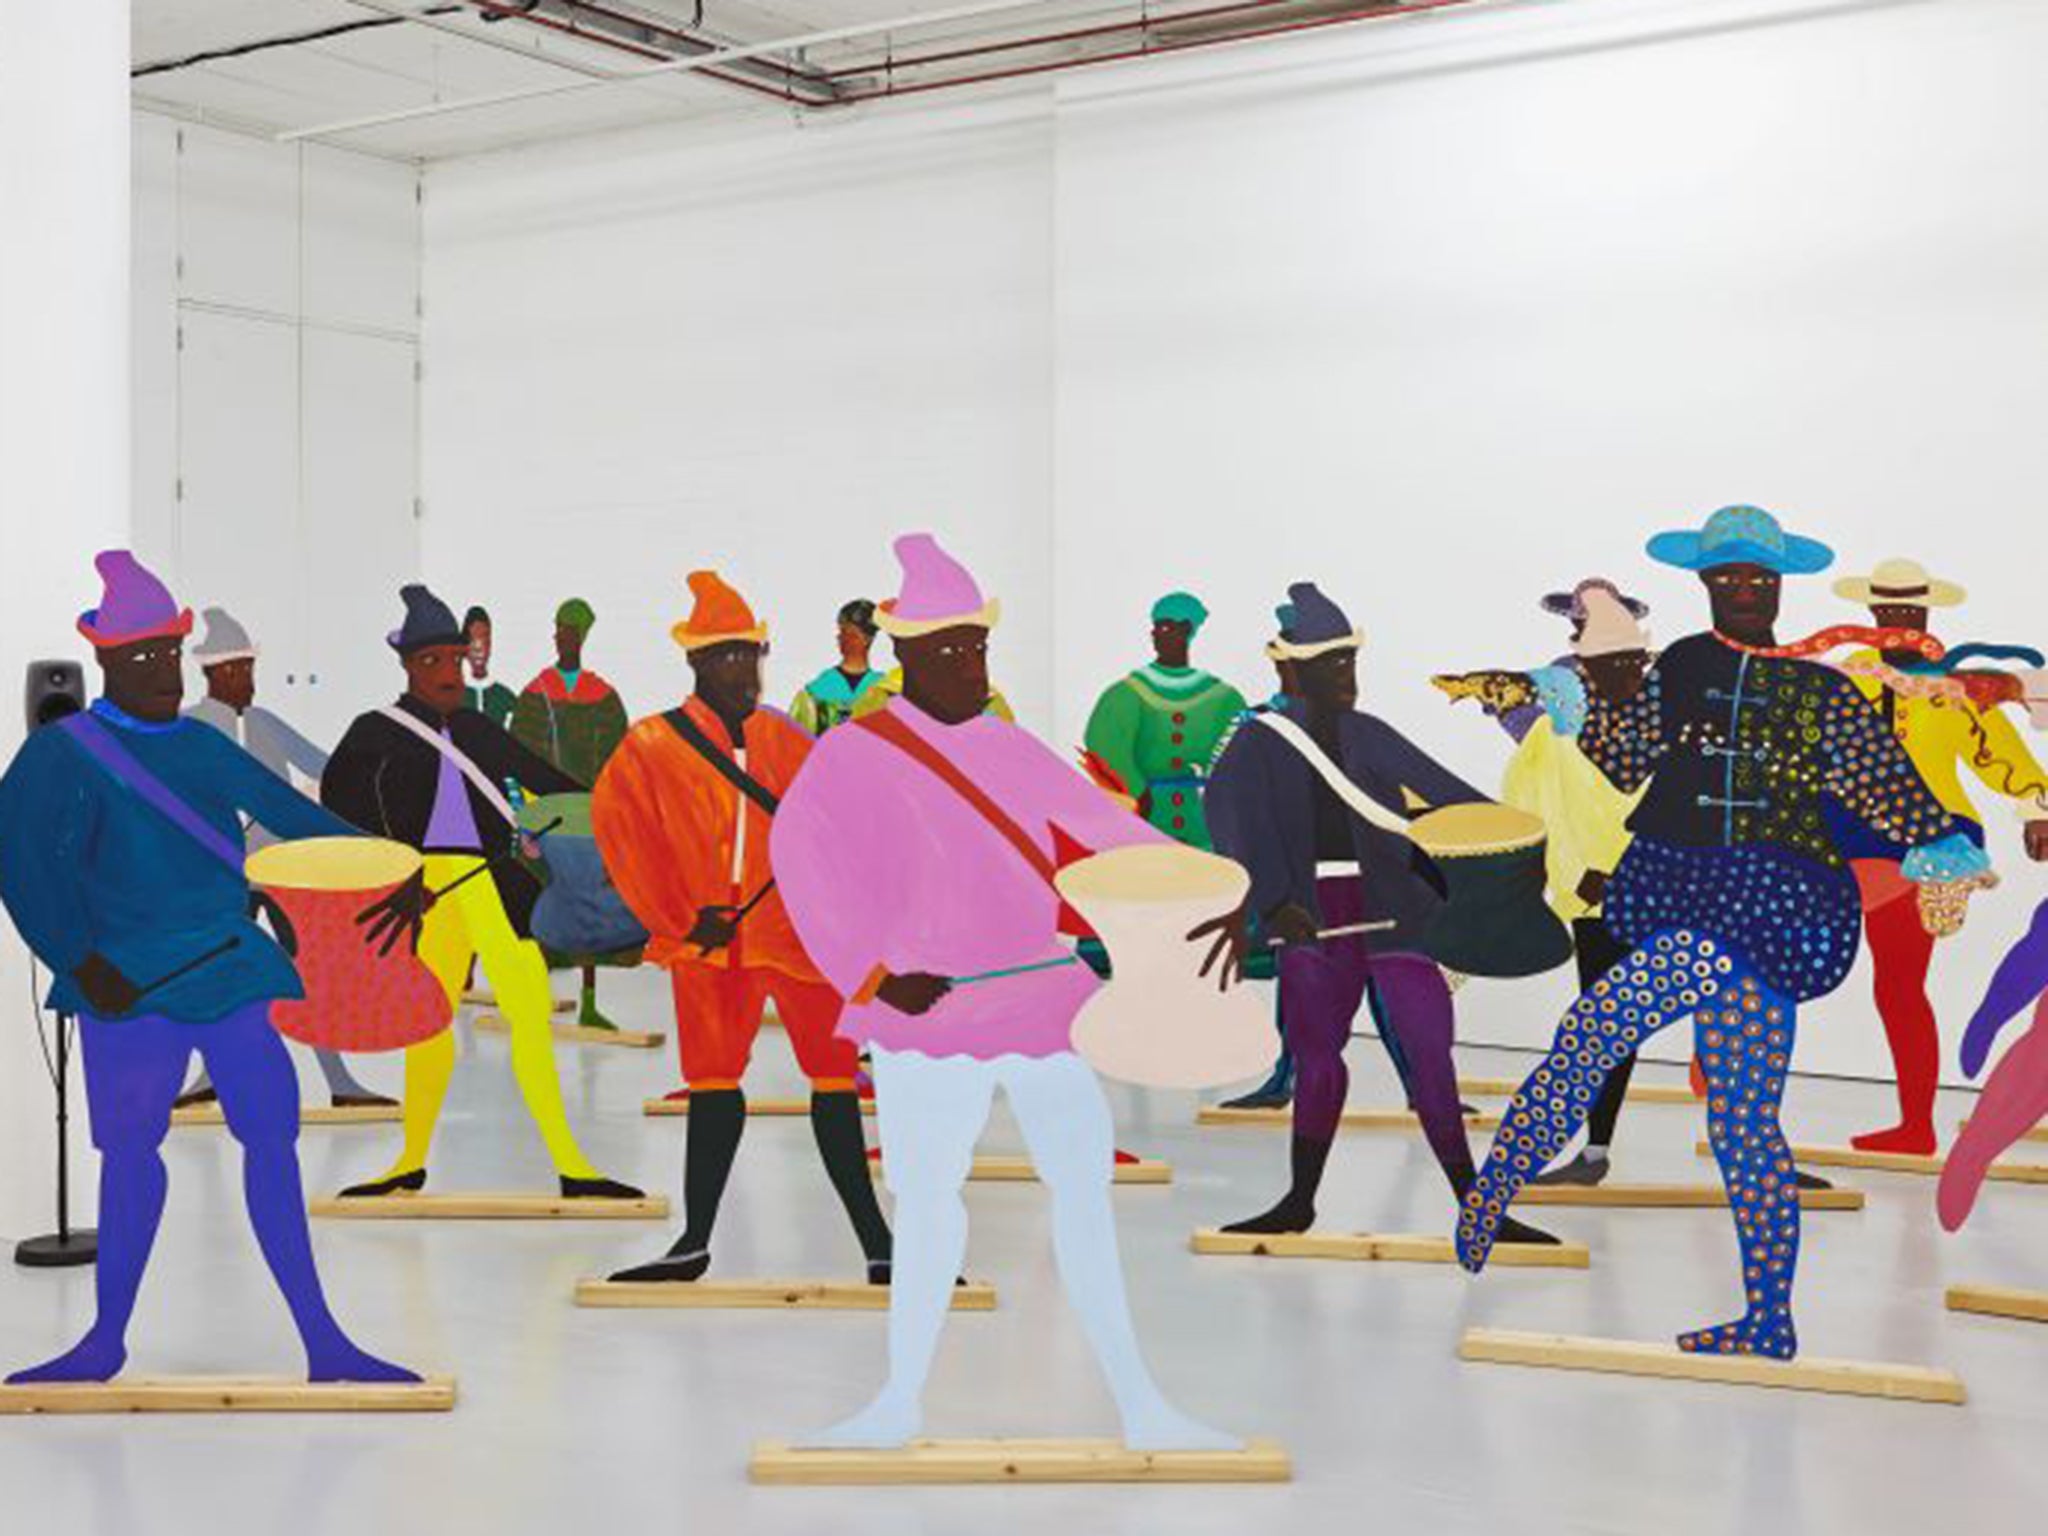 'Naming the Money' – a 2004 work by Lubaina Himid